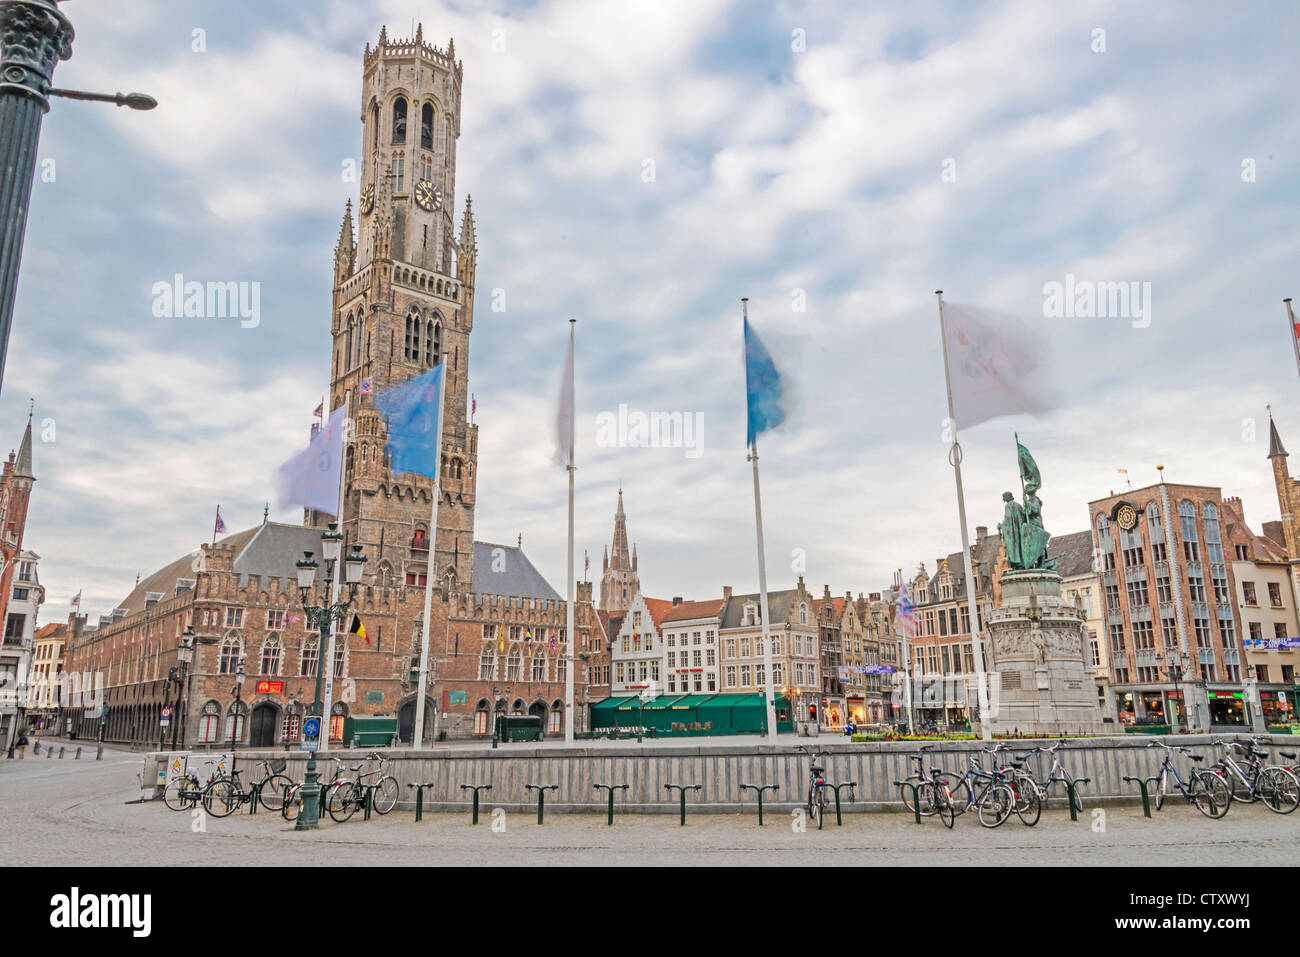 The Belfort, Brugge Market Square with flags flying around a statue of Jan Breydel and Pieter de Coninck Stock Photo